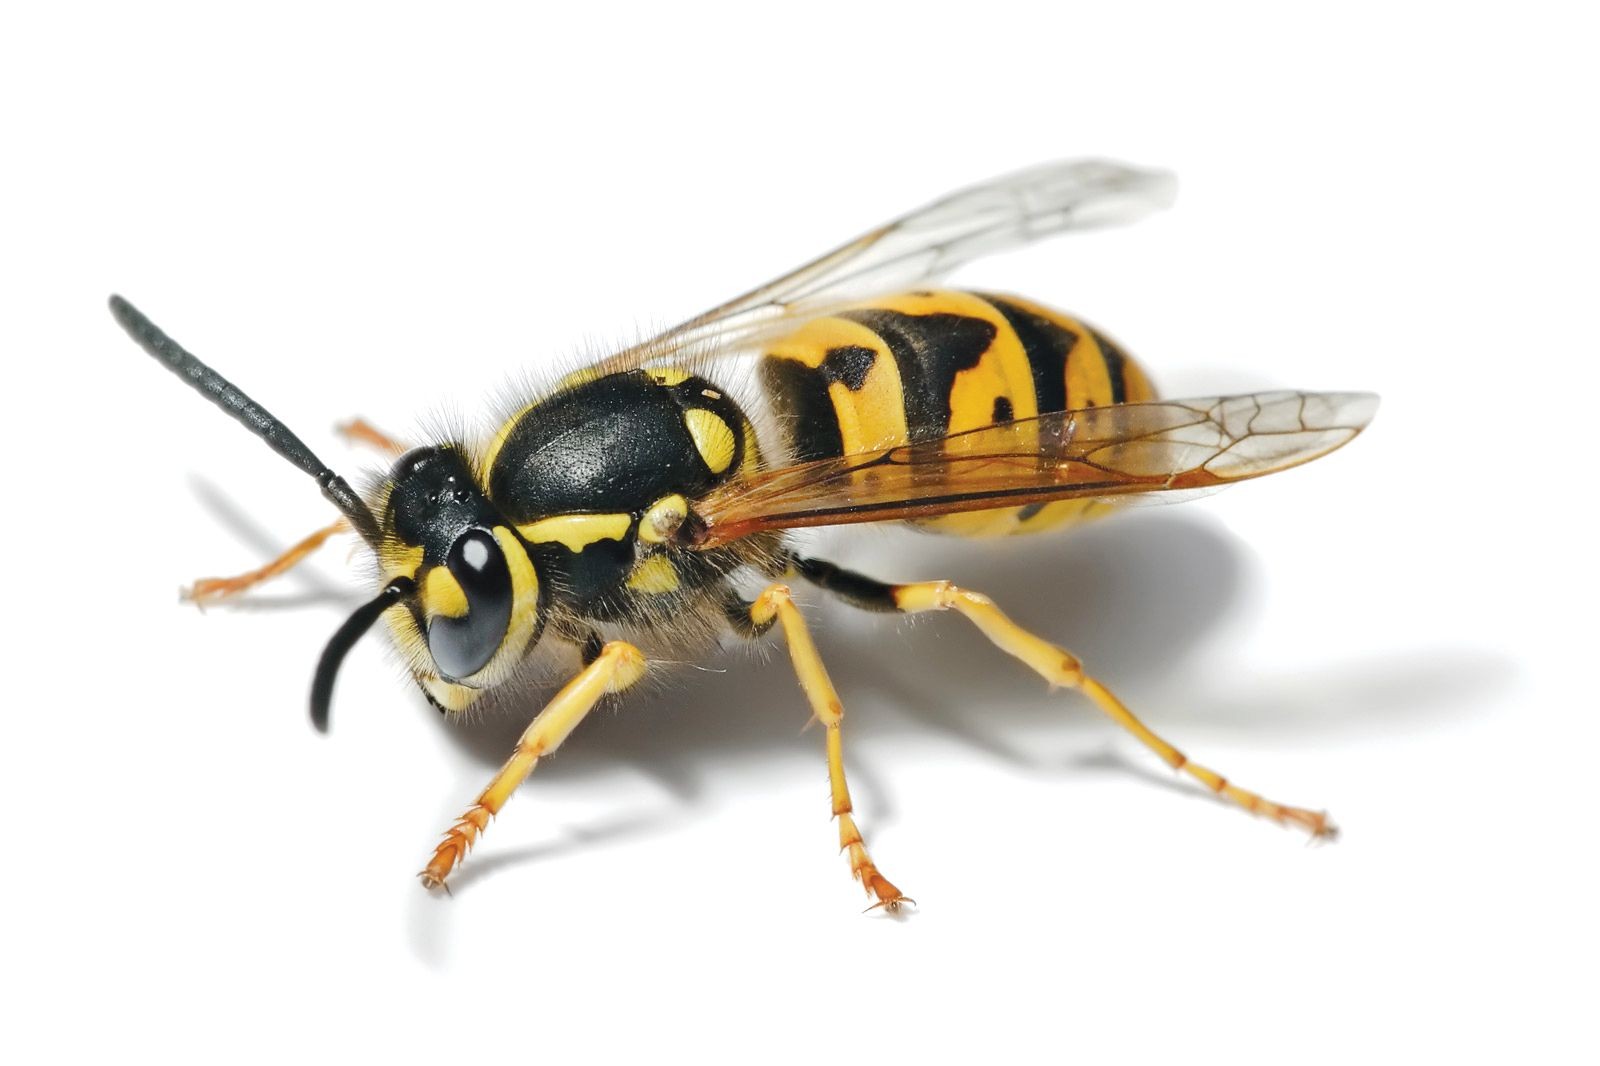 European wasp complaints on the rise - Greater Shepparton City Council